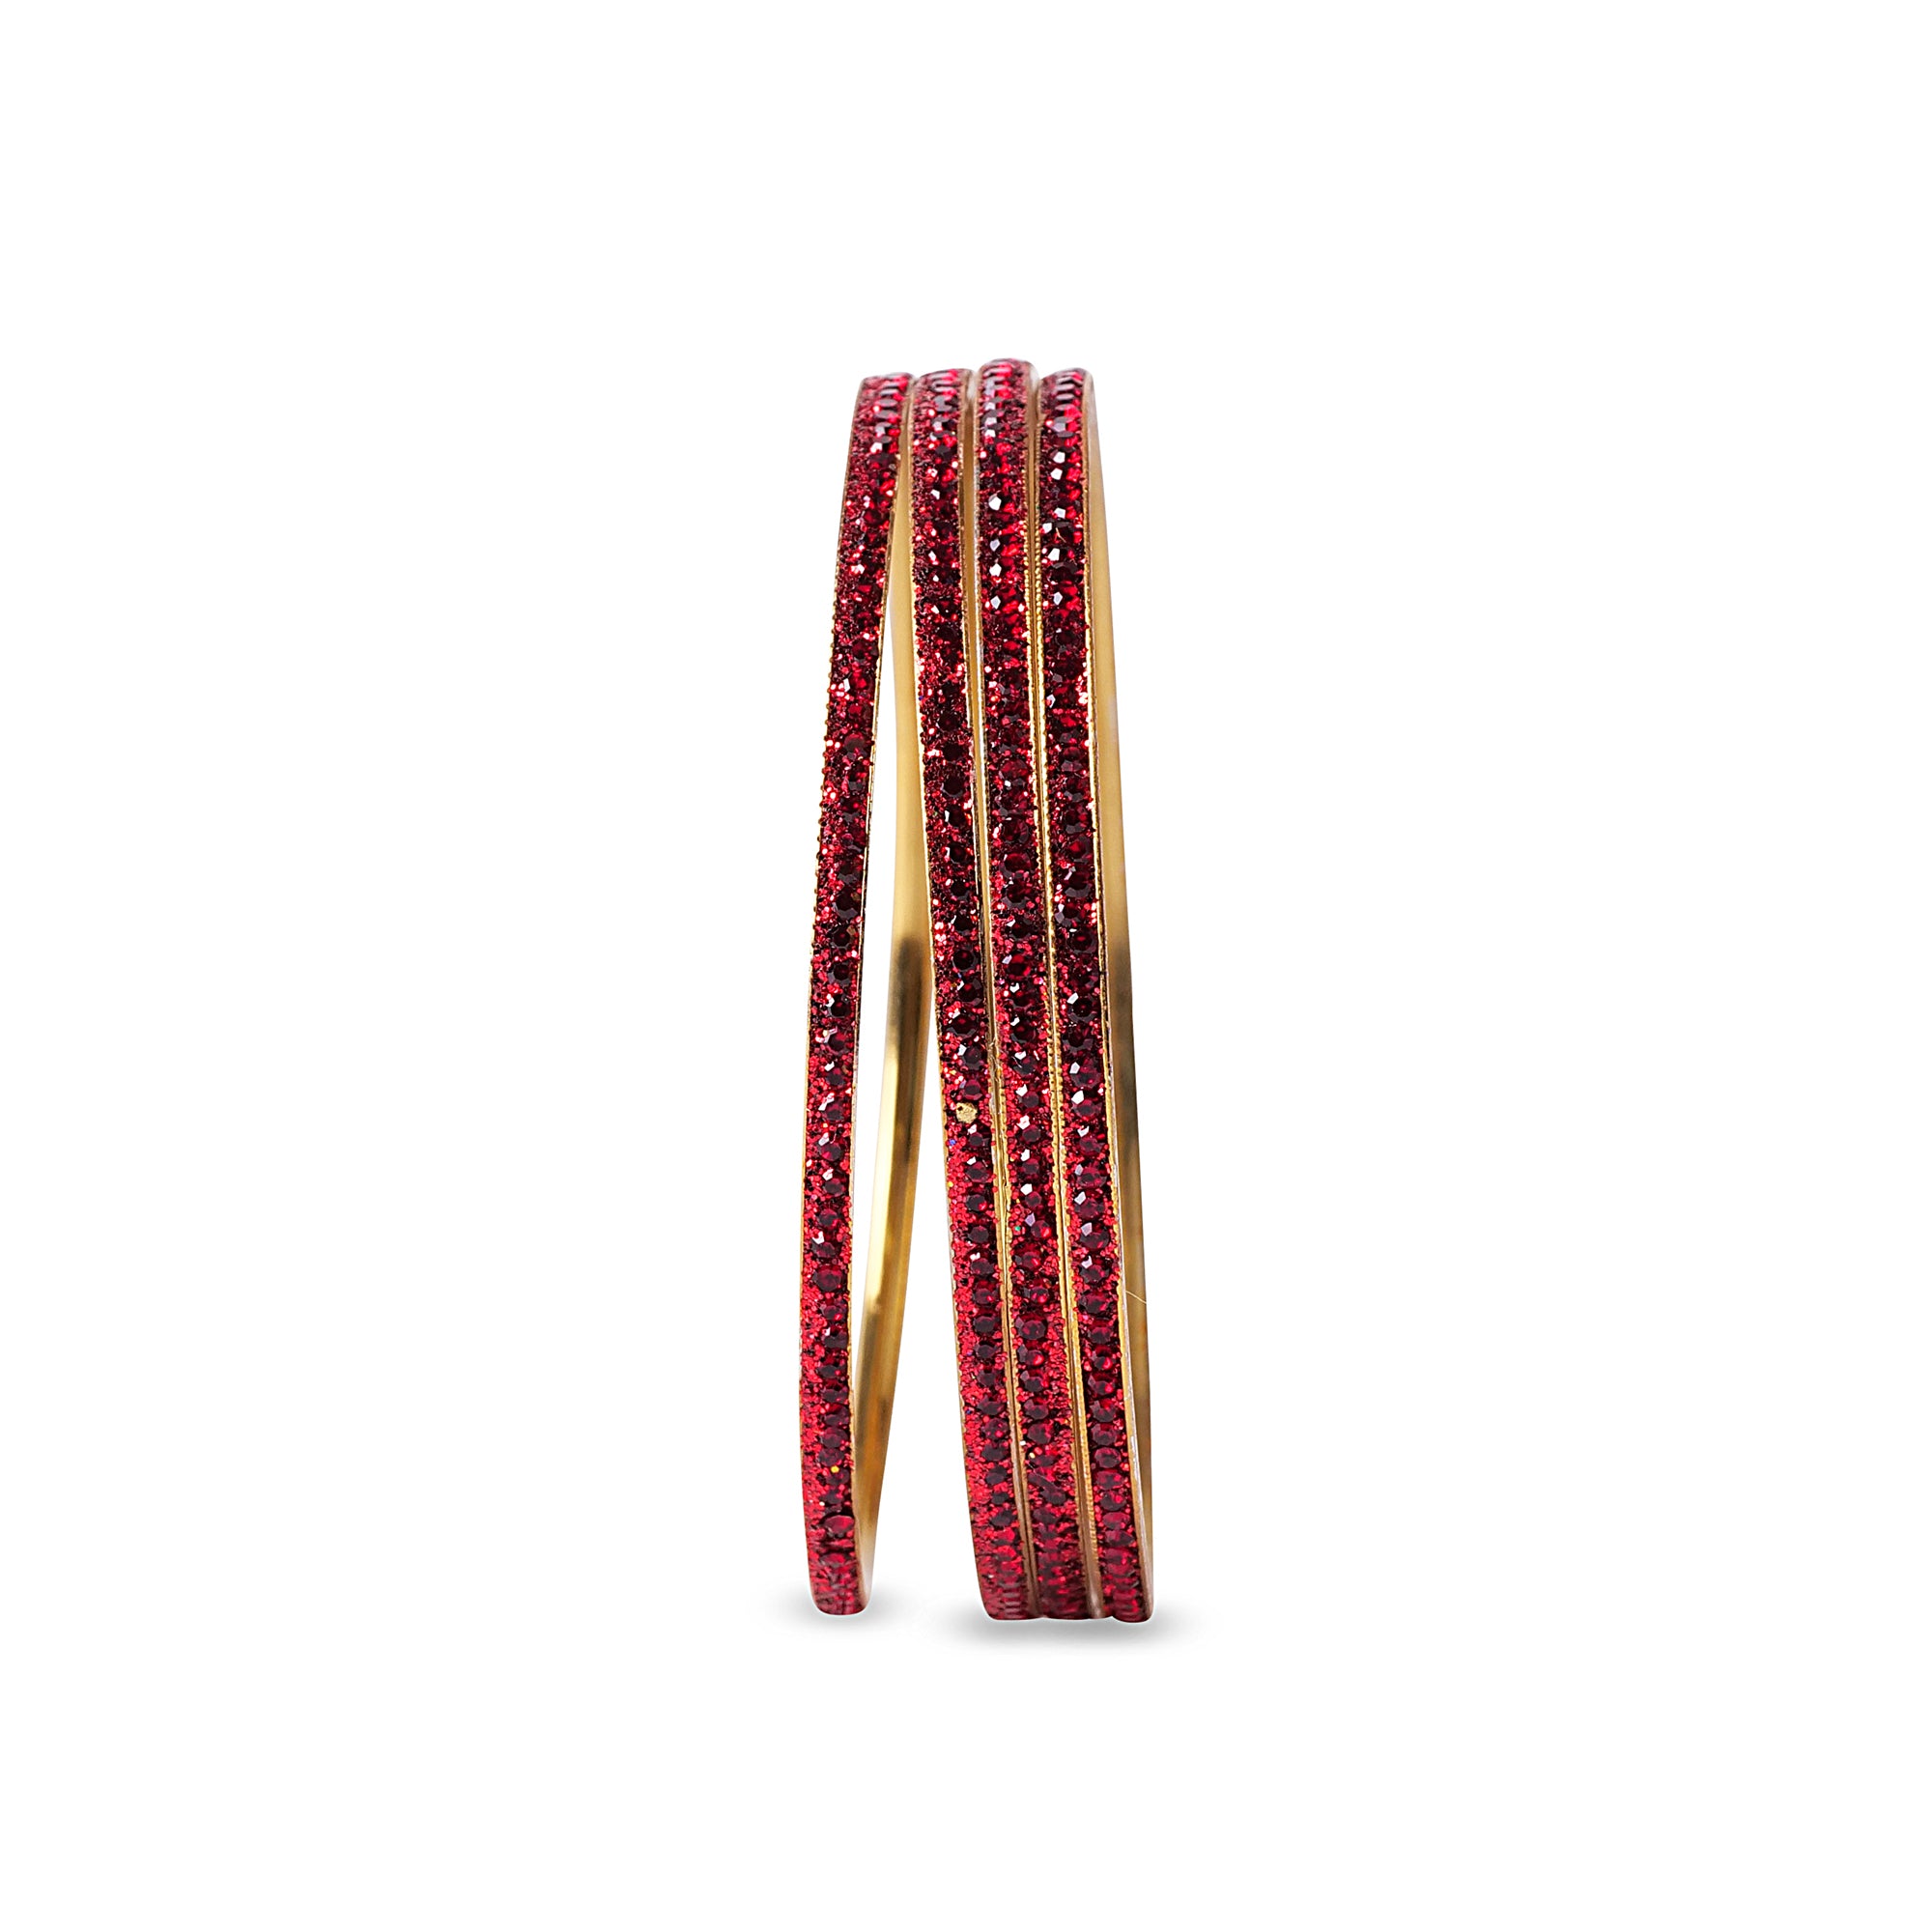 Glimmer Lakh Bangles in Maroon